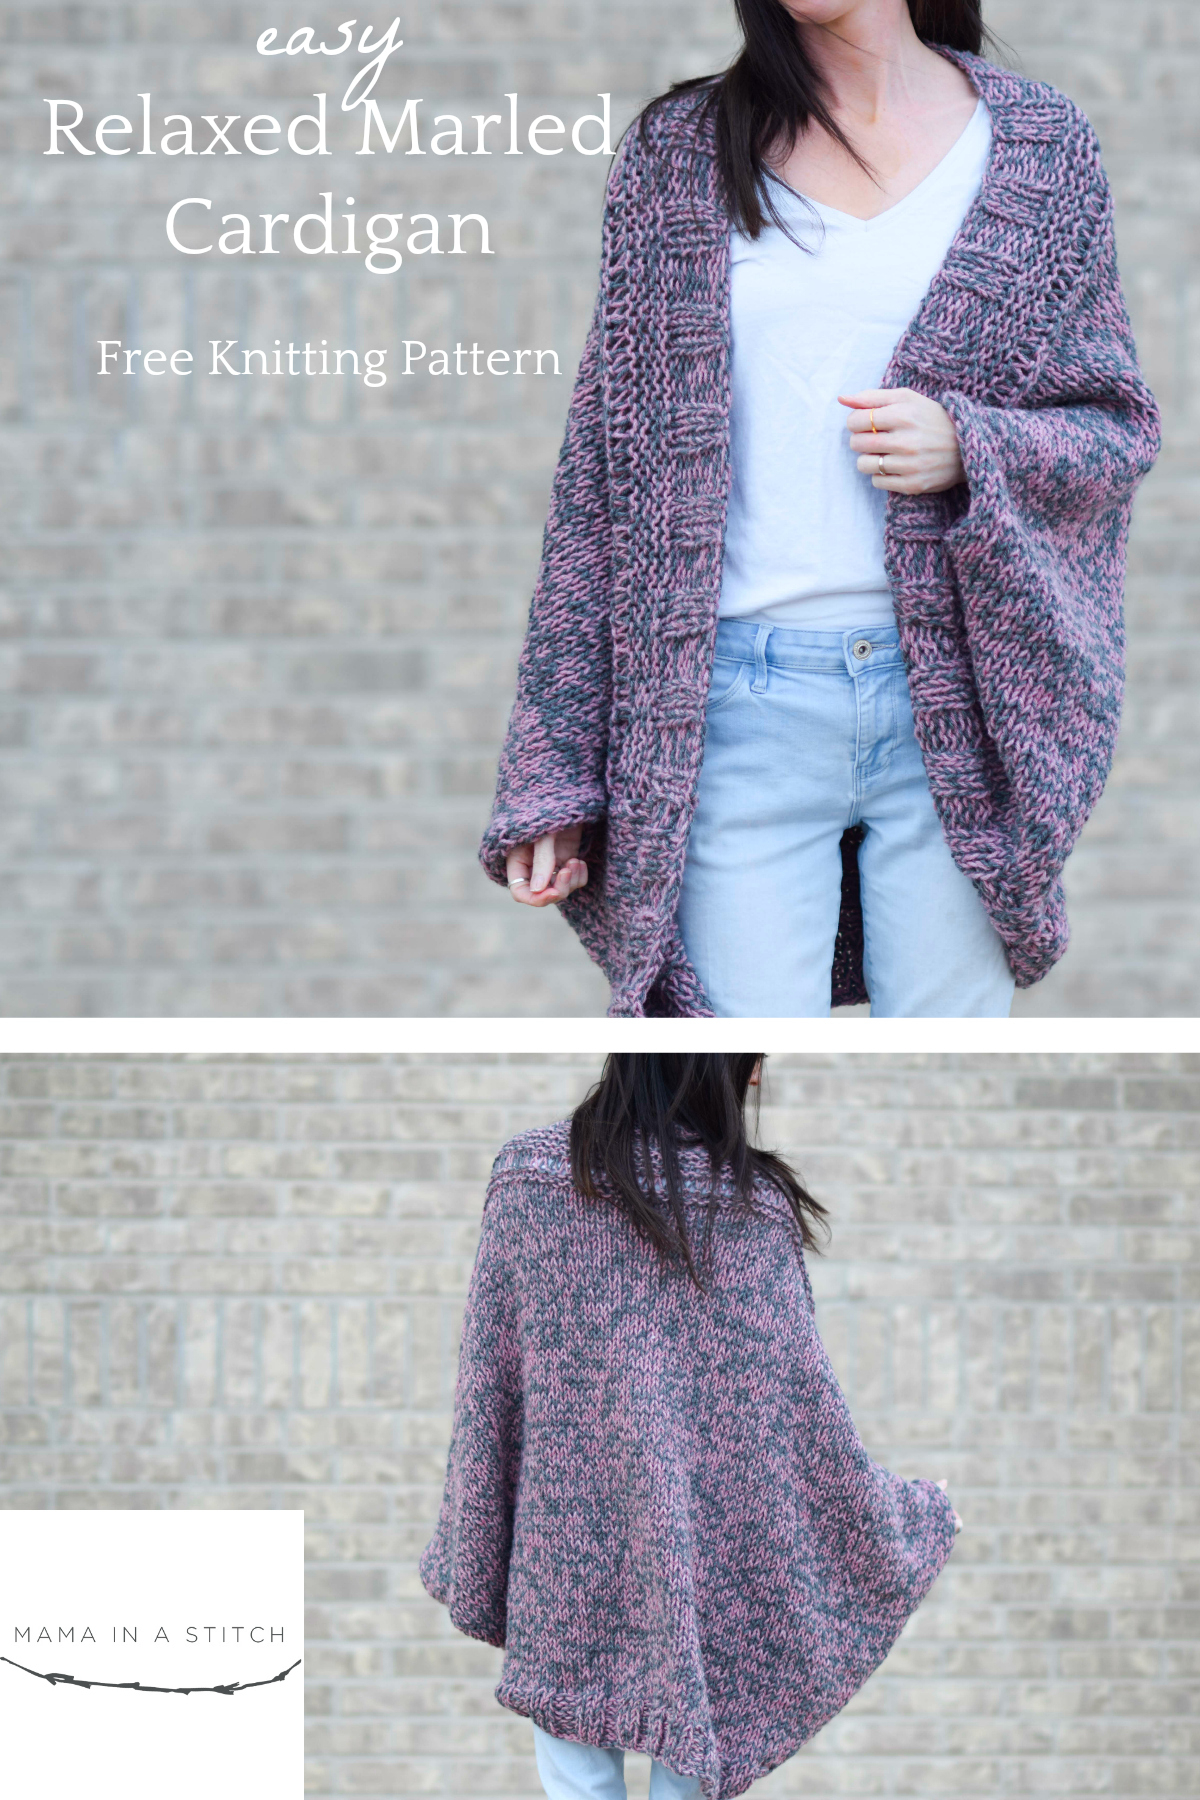 Free Easy Knitting Patterns Easy Relaxed Marled Cardigan Knitting Pattern Mama In A Stitch